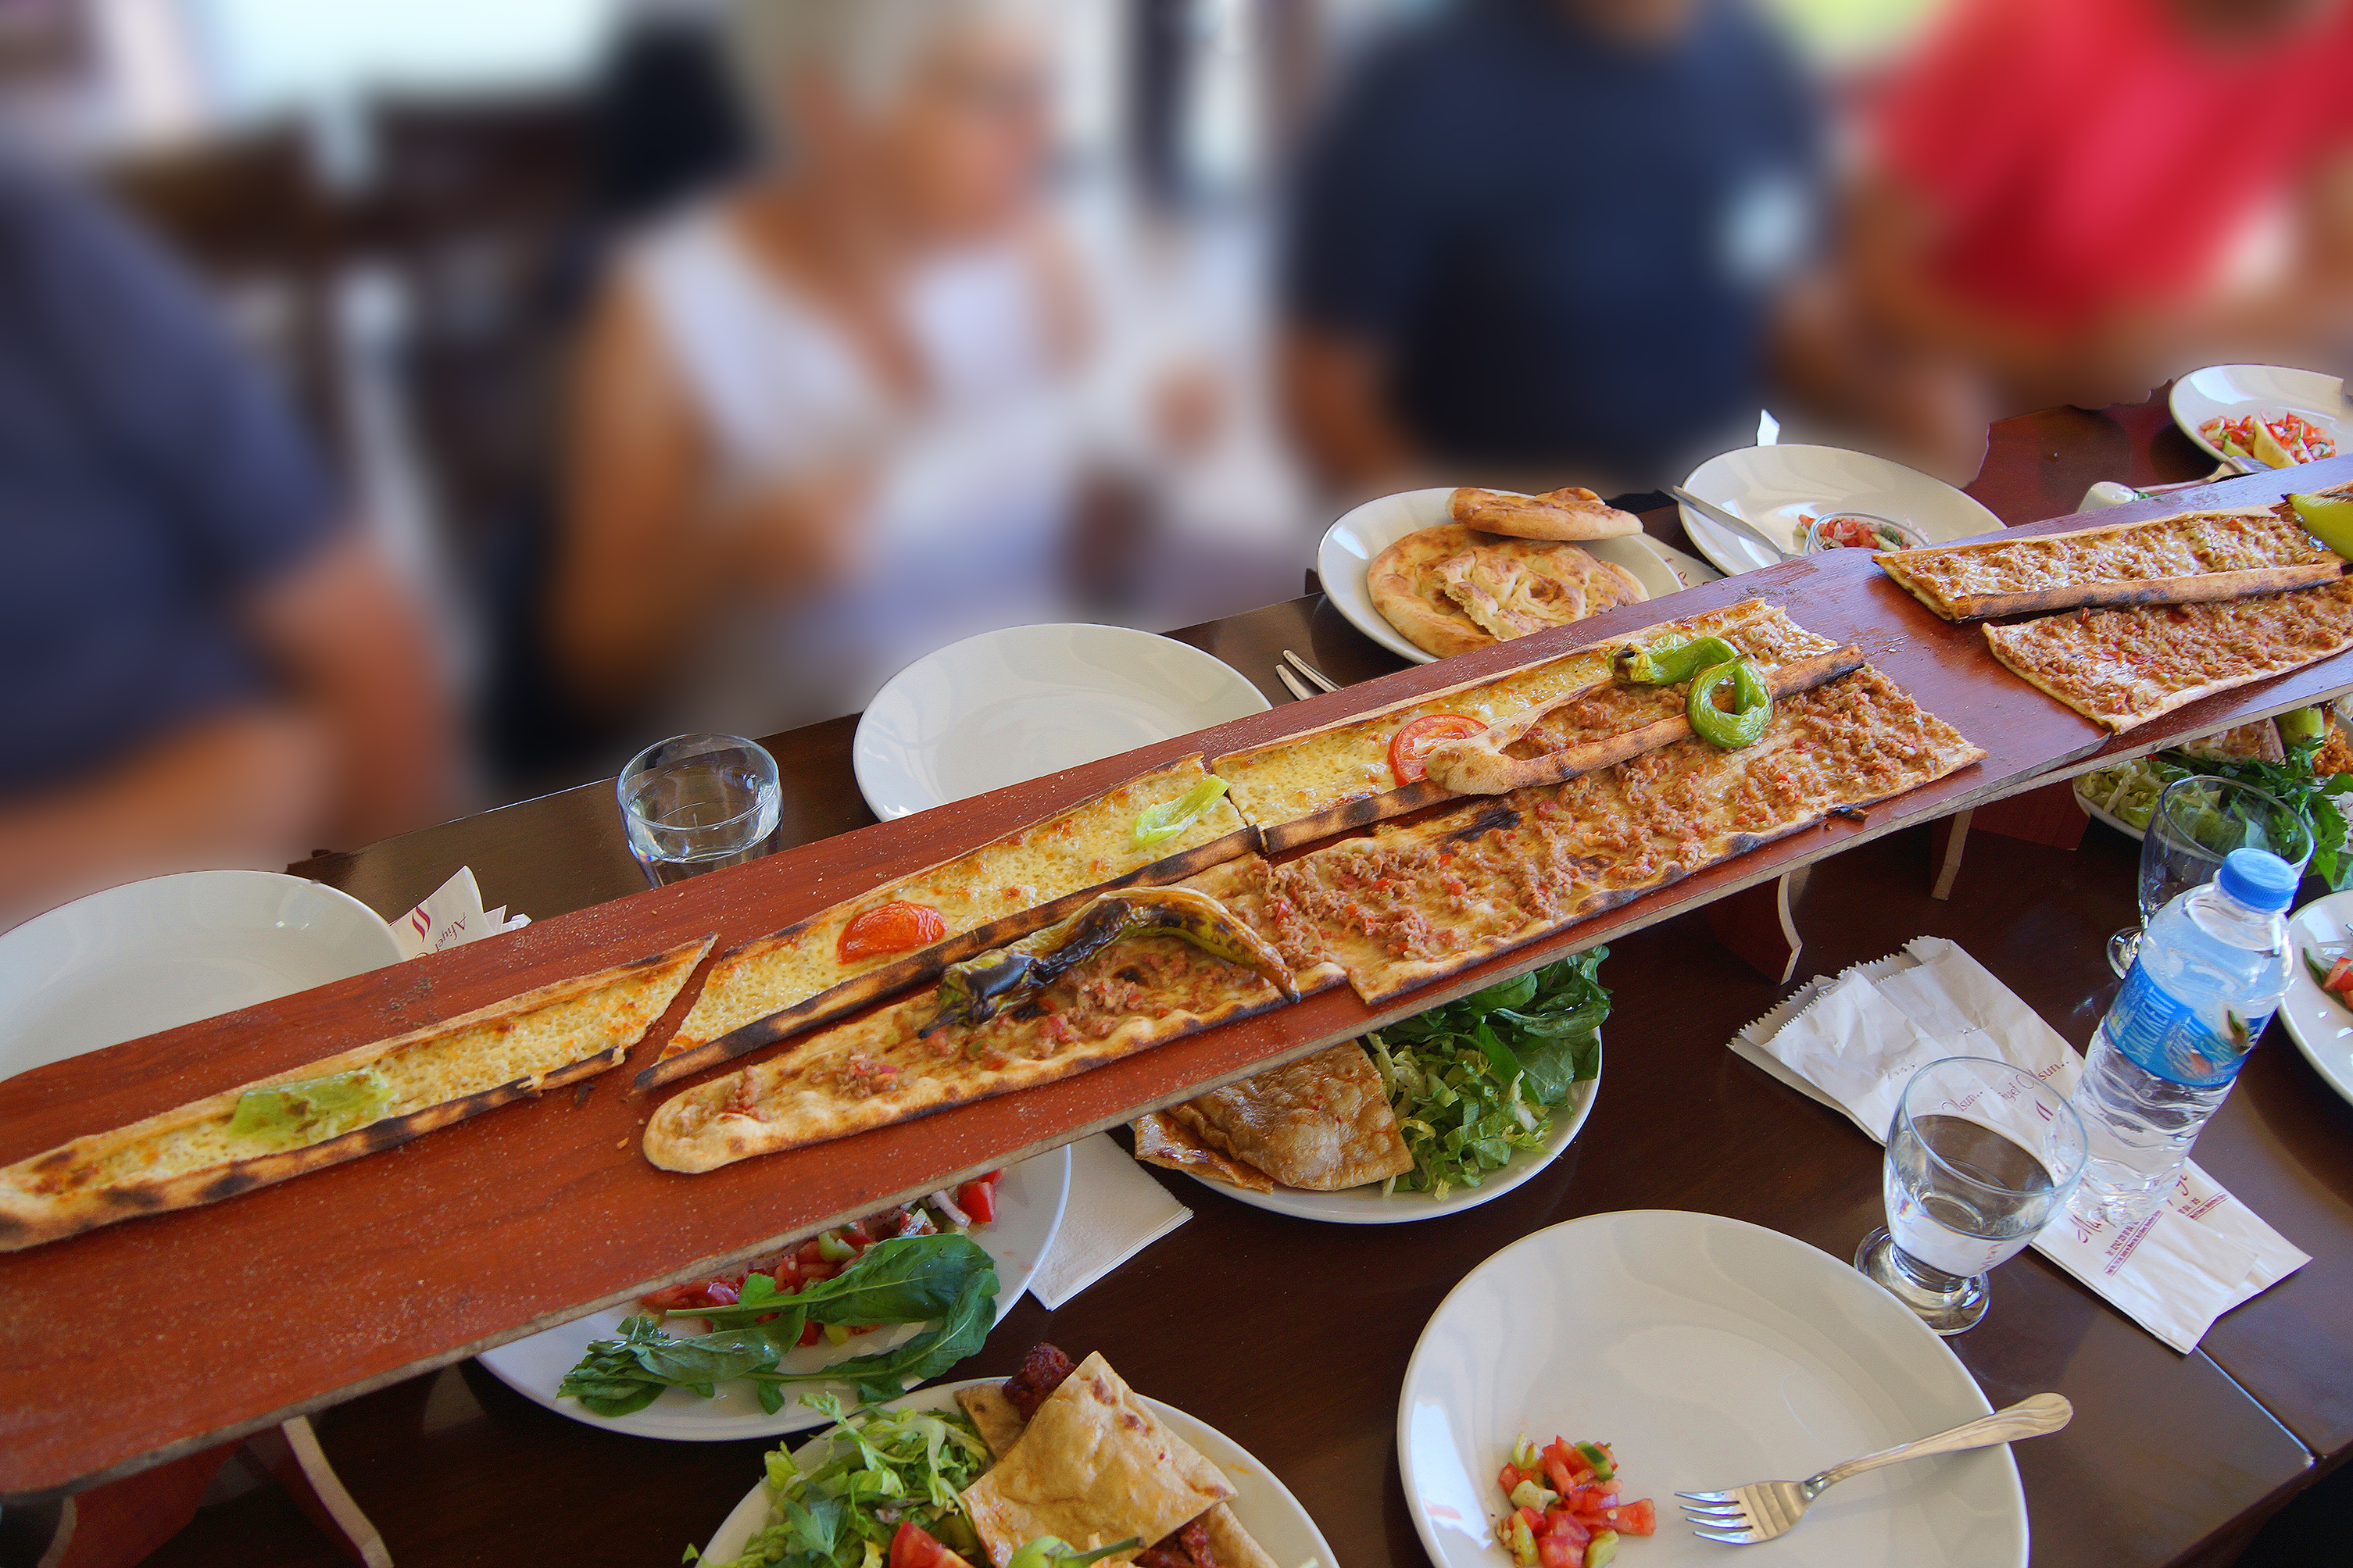 Long pides with different toppings, Antalya Turkey